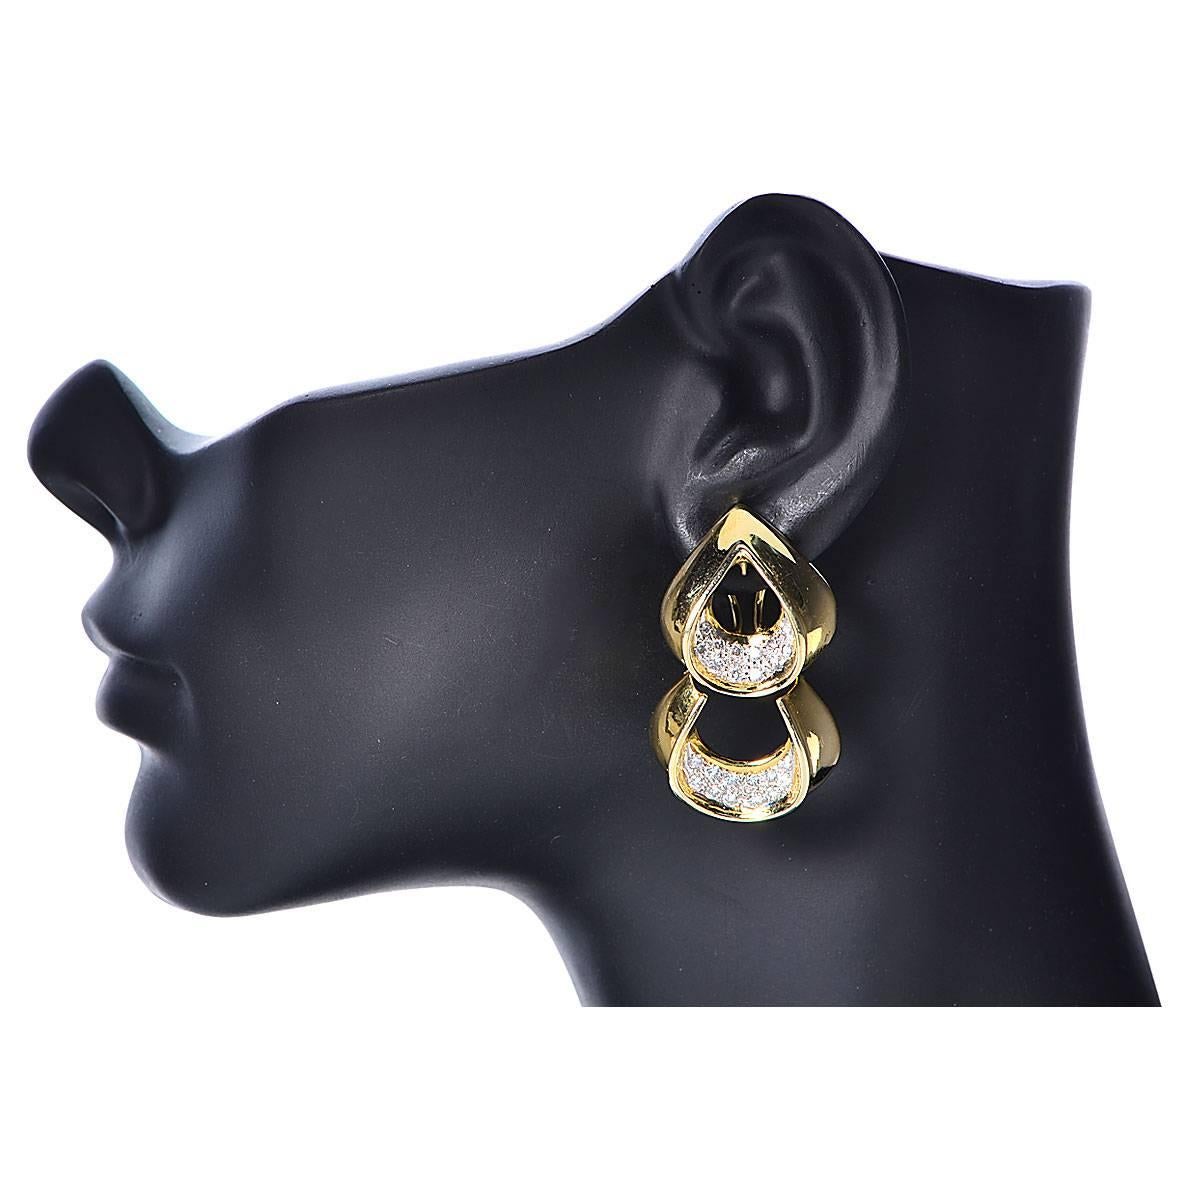 These stylish earrings are crafted in 18 karat yellow and white gold. The 48 round brilliant cut diamonds equal a total of approximately 2.07 carat total weight. The drops are mobile and the earrings measure 1.75 inches in length and 1.00 inch in